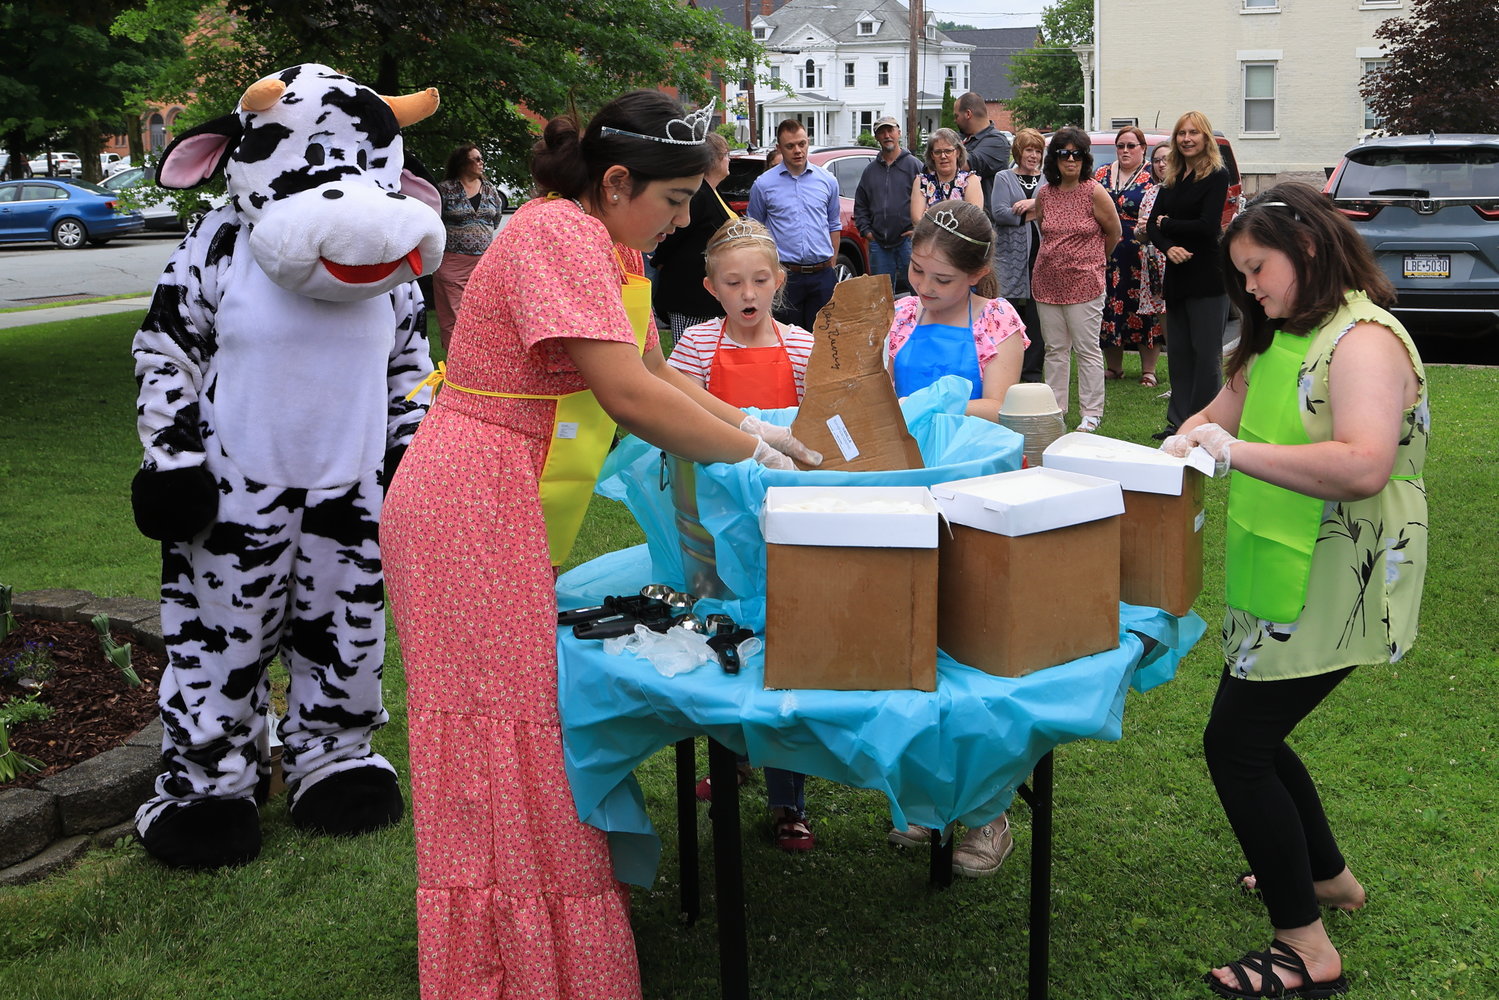 An Ice Cream Sundae building competition between the Wayne County Dairy Princess team and the Wayne County Commissioners was held on the lawn of the Wayne County Court House following the regular June 16, Commissioners meeting. Around the table are  2022 Wayne County Dairy Princess Elektra Kehagias, left, getting the ice cream into the big tub with the help of Dairy Miss Chloe Tyler, Dairy Miss Zoe Tyler and Dairy Miss Kenley Roberts.